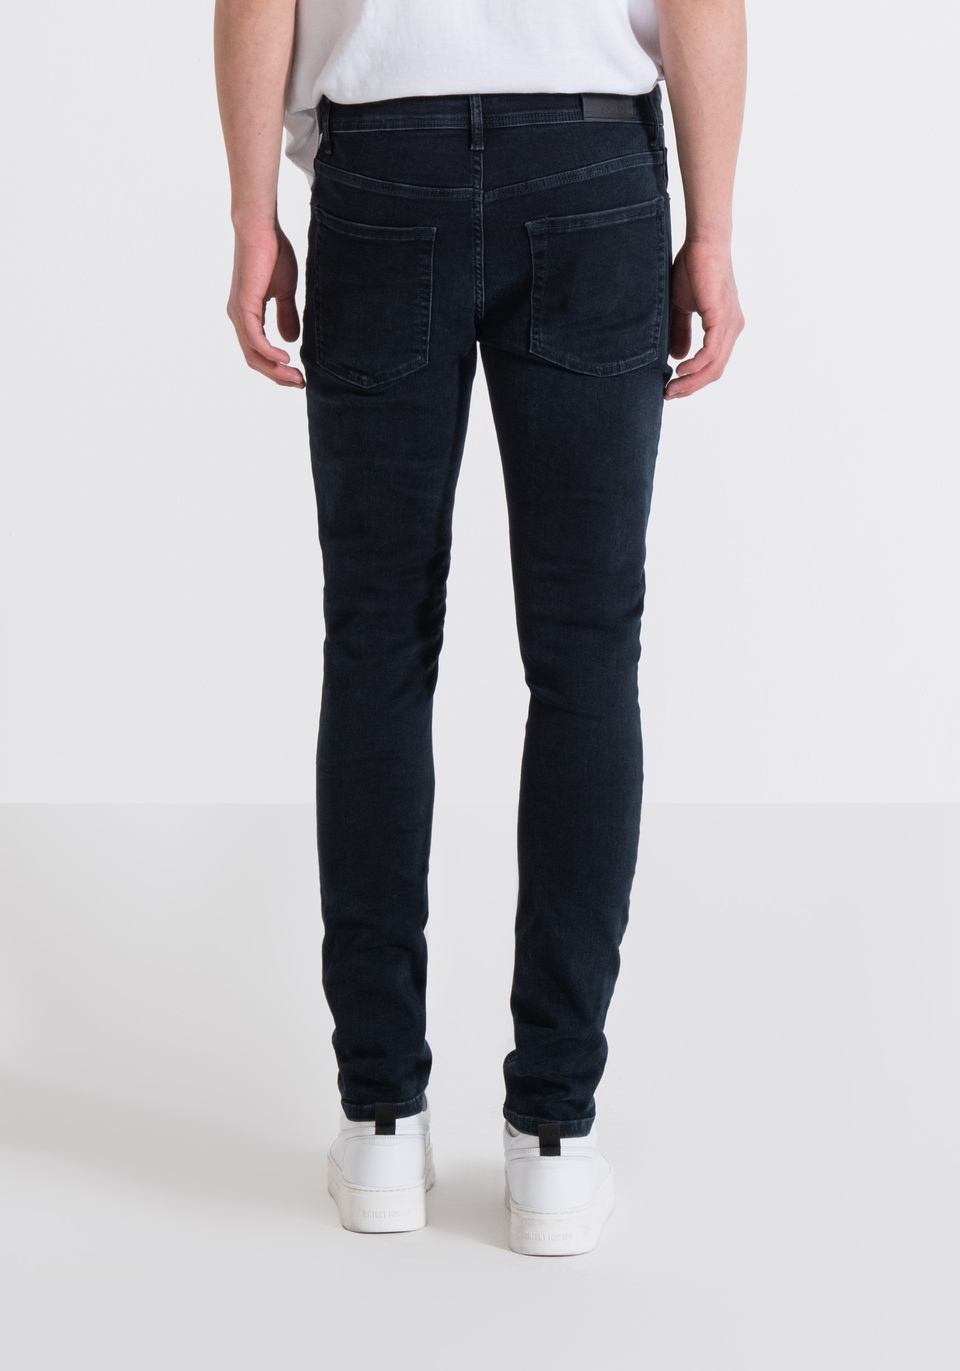 "OZZY" TAPERED FIT JEANS IN STRETCH DENIM WITH DARK WASH - Antony Morato Online Shop